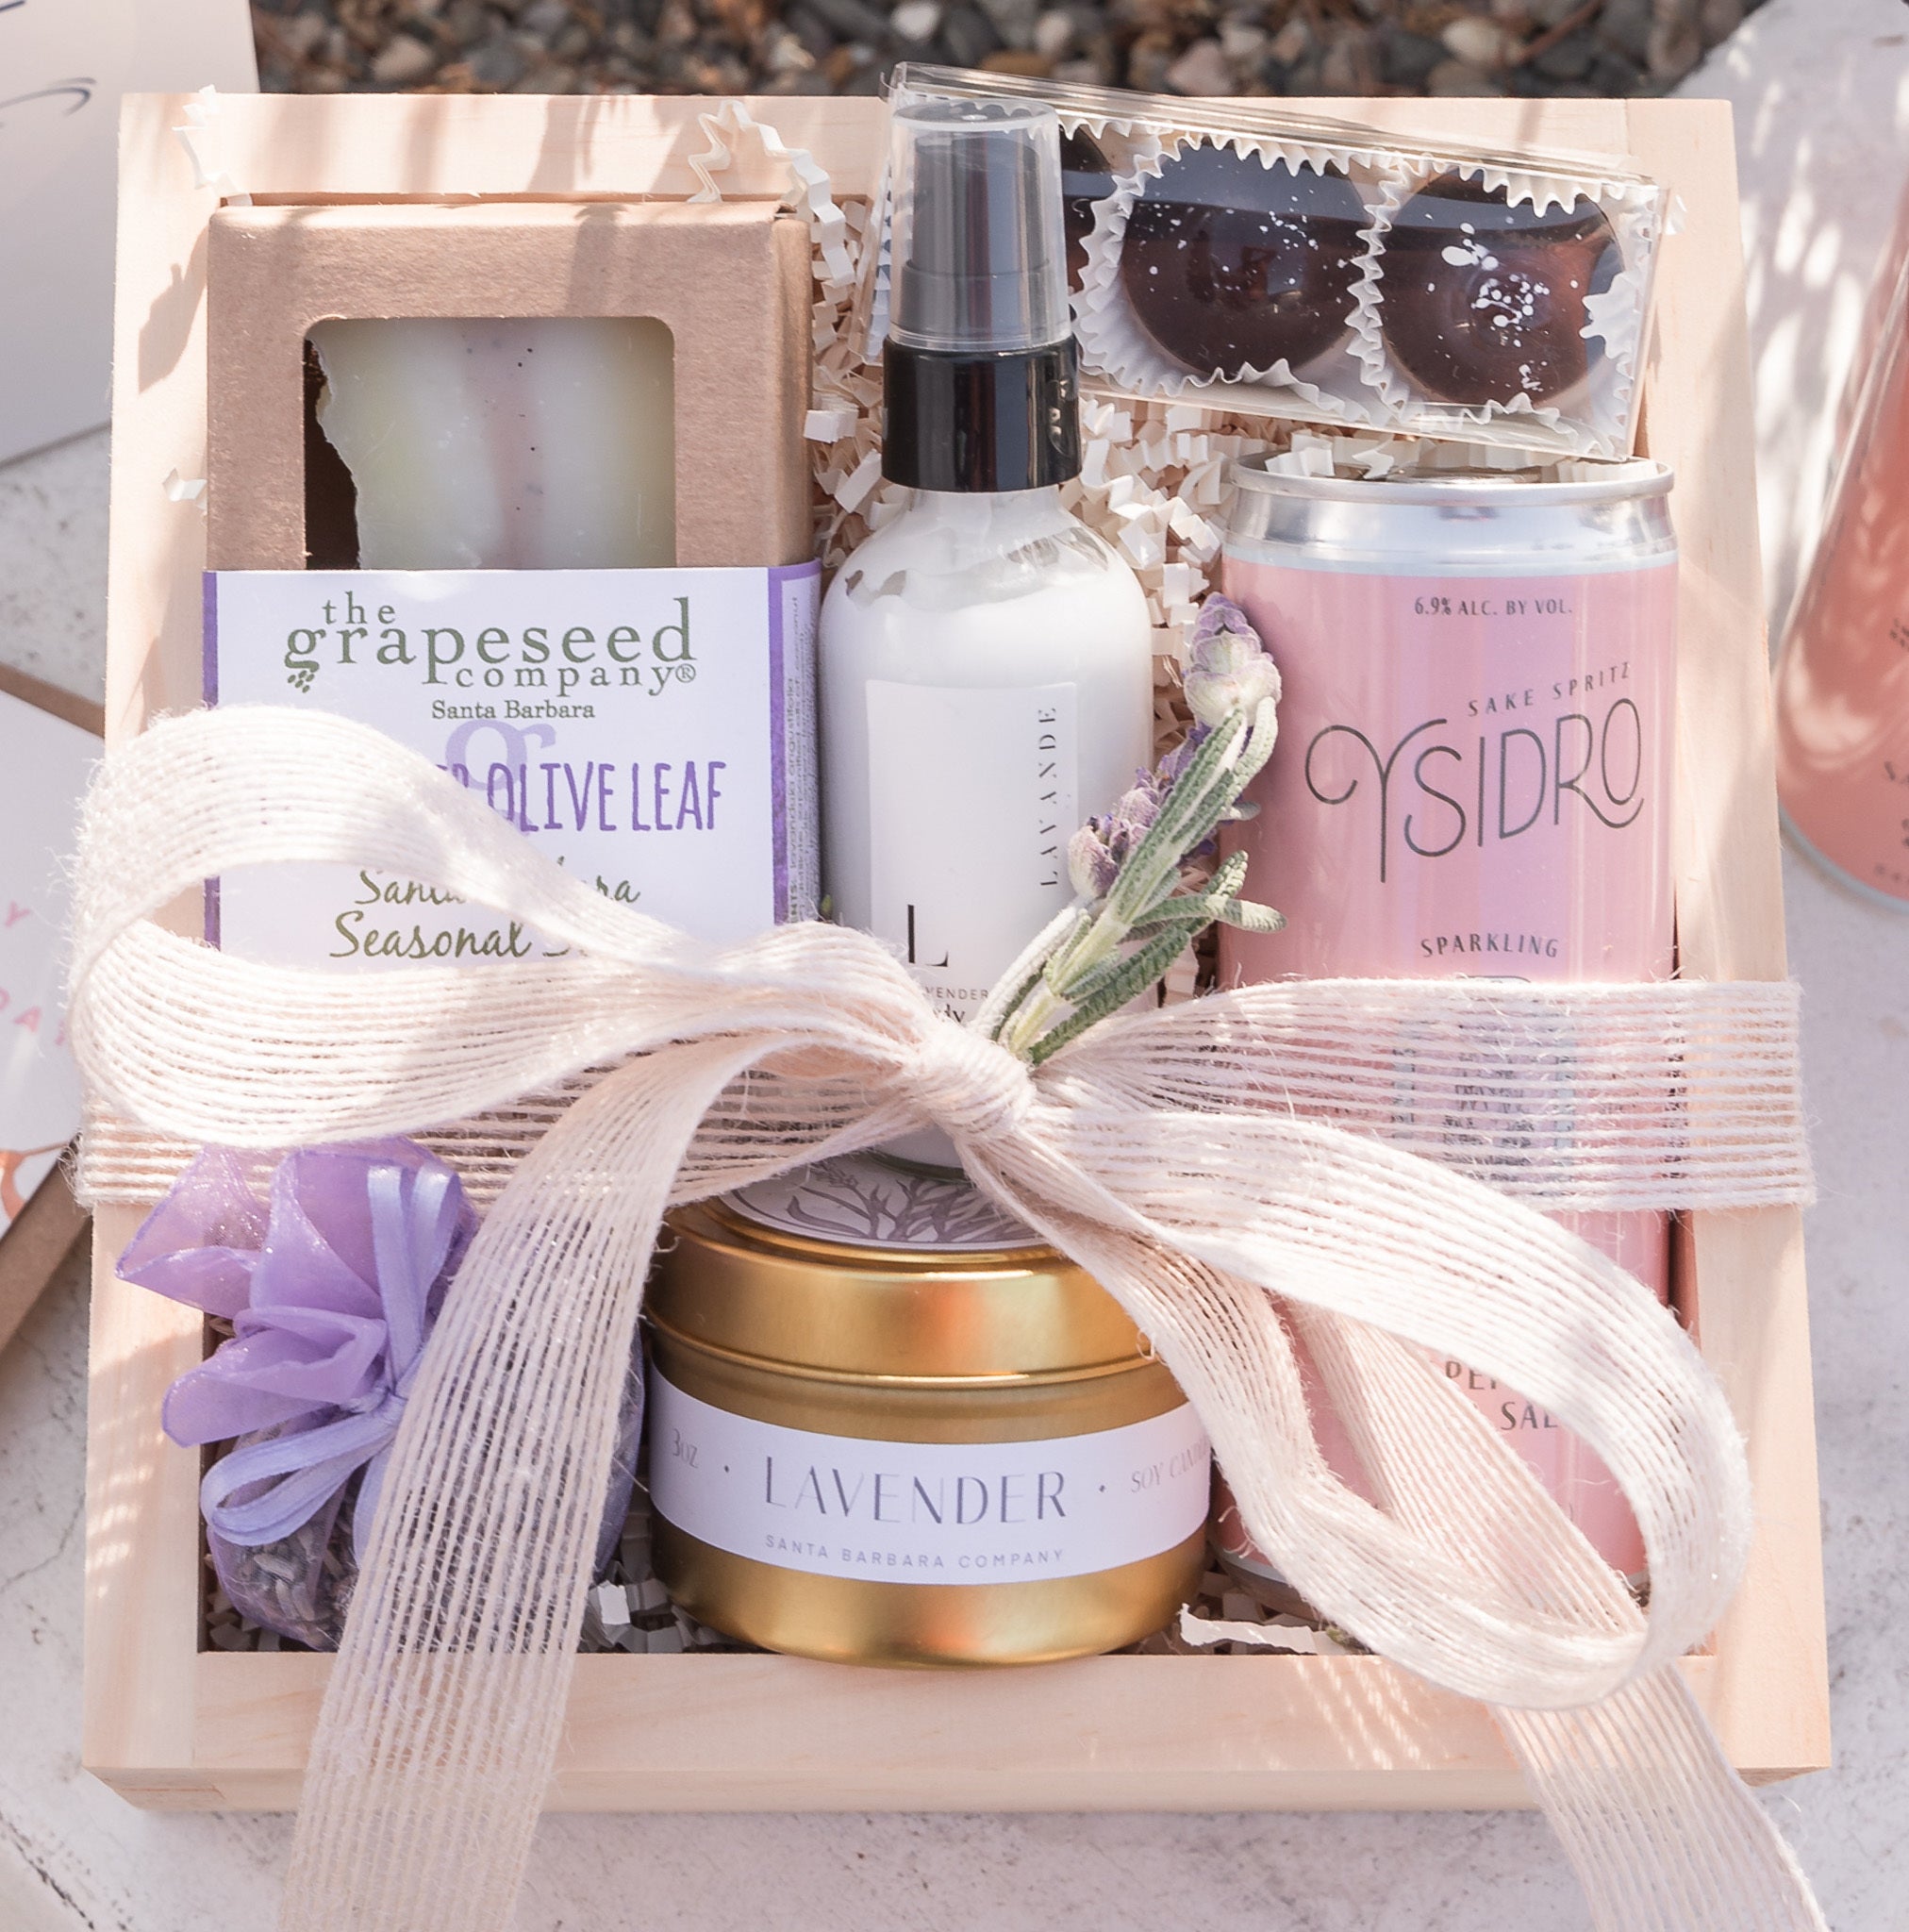 Pink and purple themed wood box with soap, lotion, truffles, candle, lavender sachet, and a can of sake